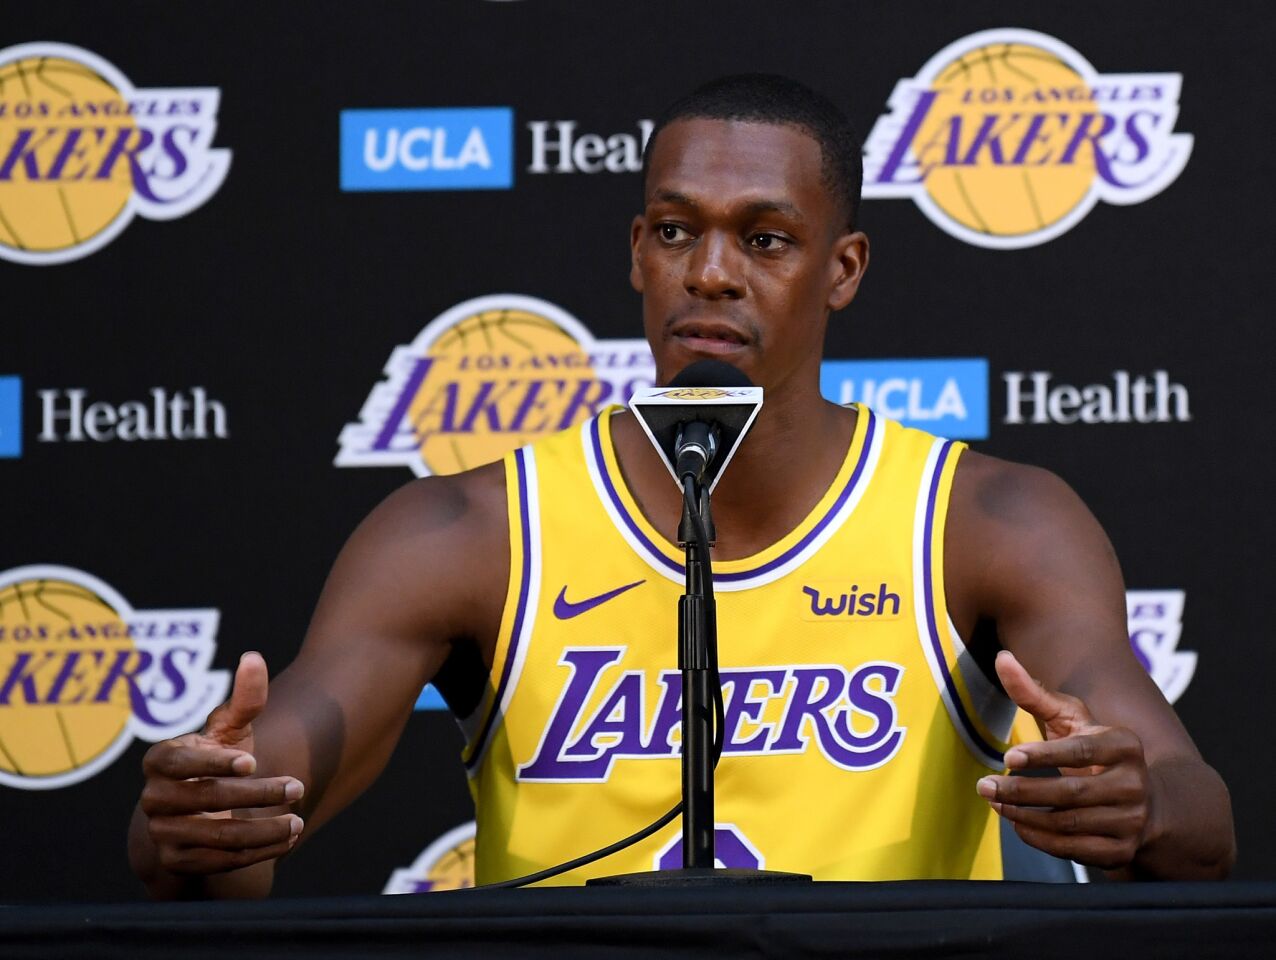 EL SEGUNDO, CA - SEPTEMBER 24: Rajon Rondo of the Los Angeles Lakers speaks to the press during the Los Angeles Lakers Media Day at the UCLA Health Training Center on September 24, 2018 in El Segundo, California. (Photo by Harry How/Getty Images) ** OUTS - ELSENT, FPG, CM - OUTS * NM, PH, VA if sourced by CT, LA or MoD **